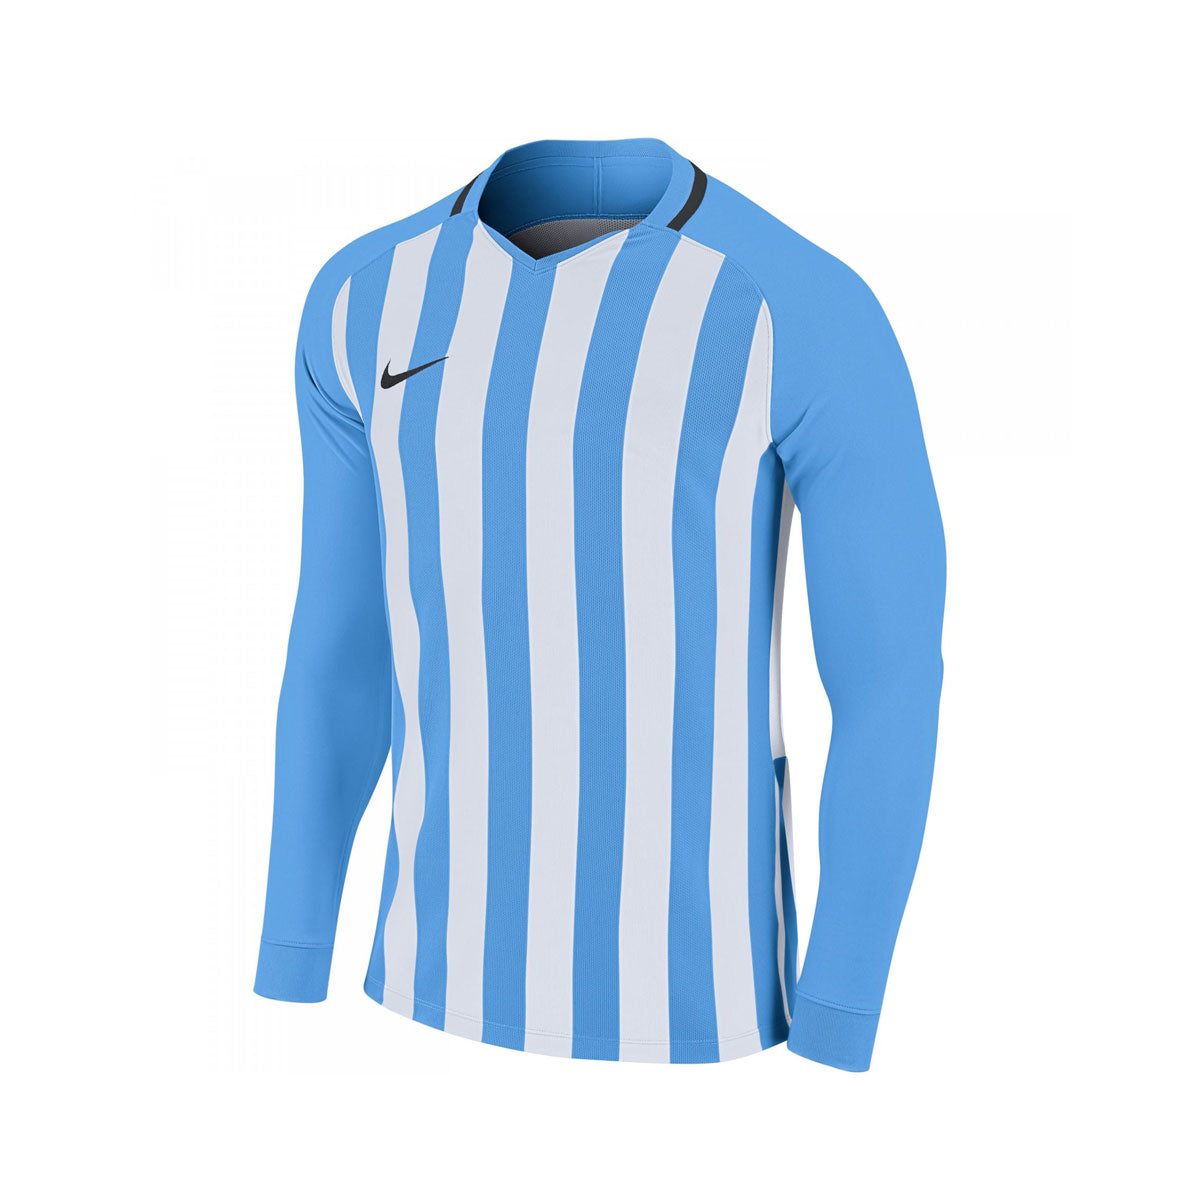 Nike Boy's Striped Division LS Jersey x